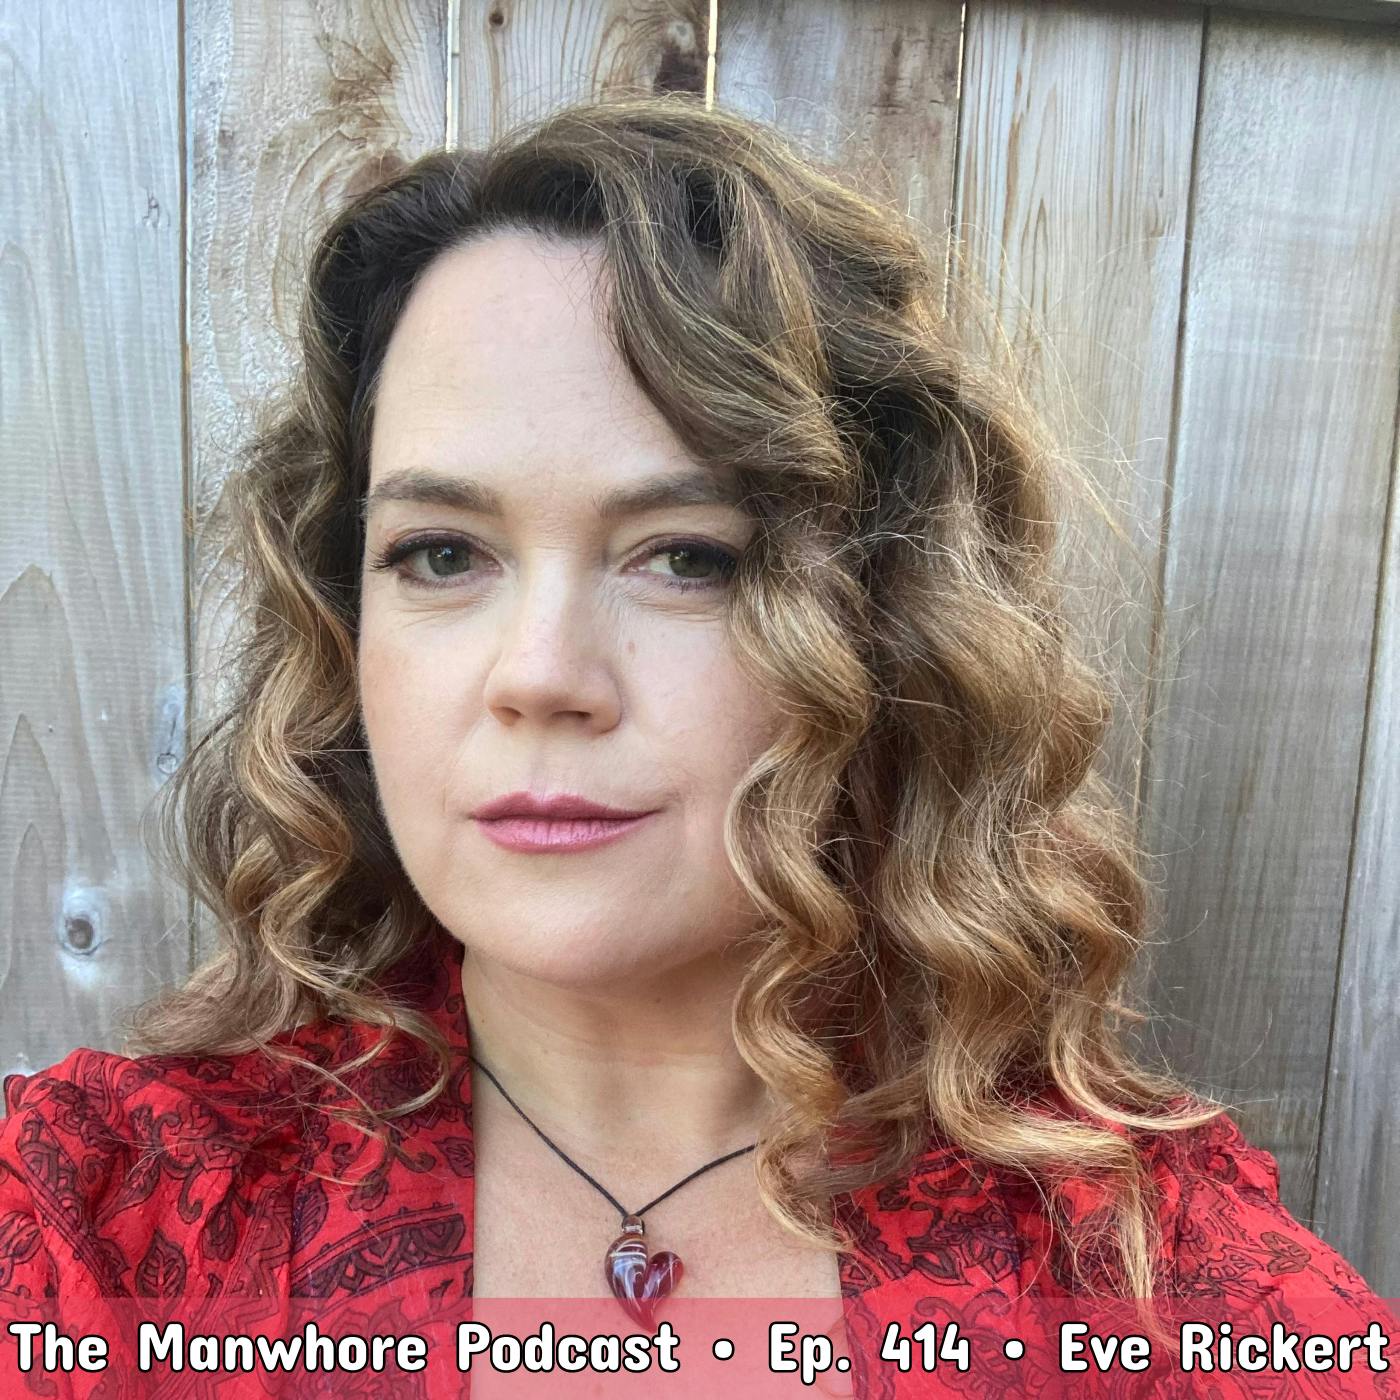 Ep. 414: Secret Monogamy Rules, Public Accountability, and Poly Culture with Eve Rickert